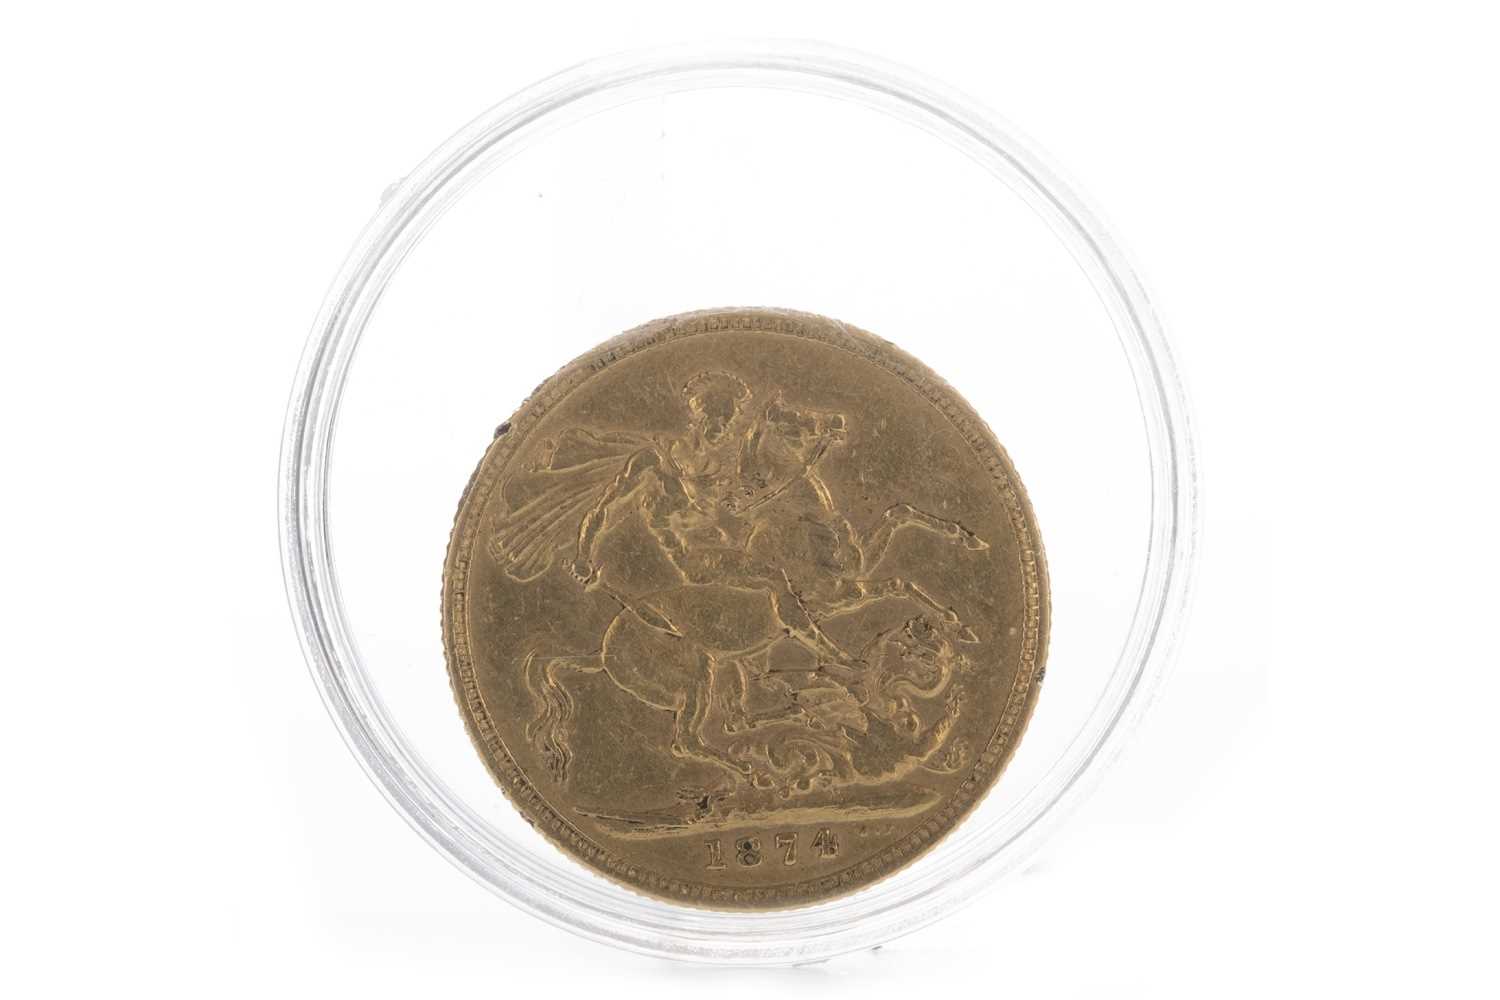 Lot 18 - A QUEEN VICTORA (1837 - 1901) GOLD SOVEREIGN DATED 1874